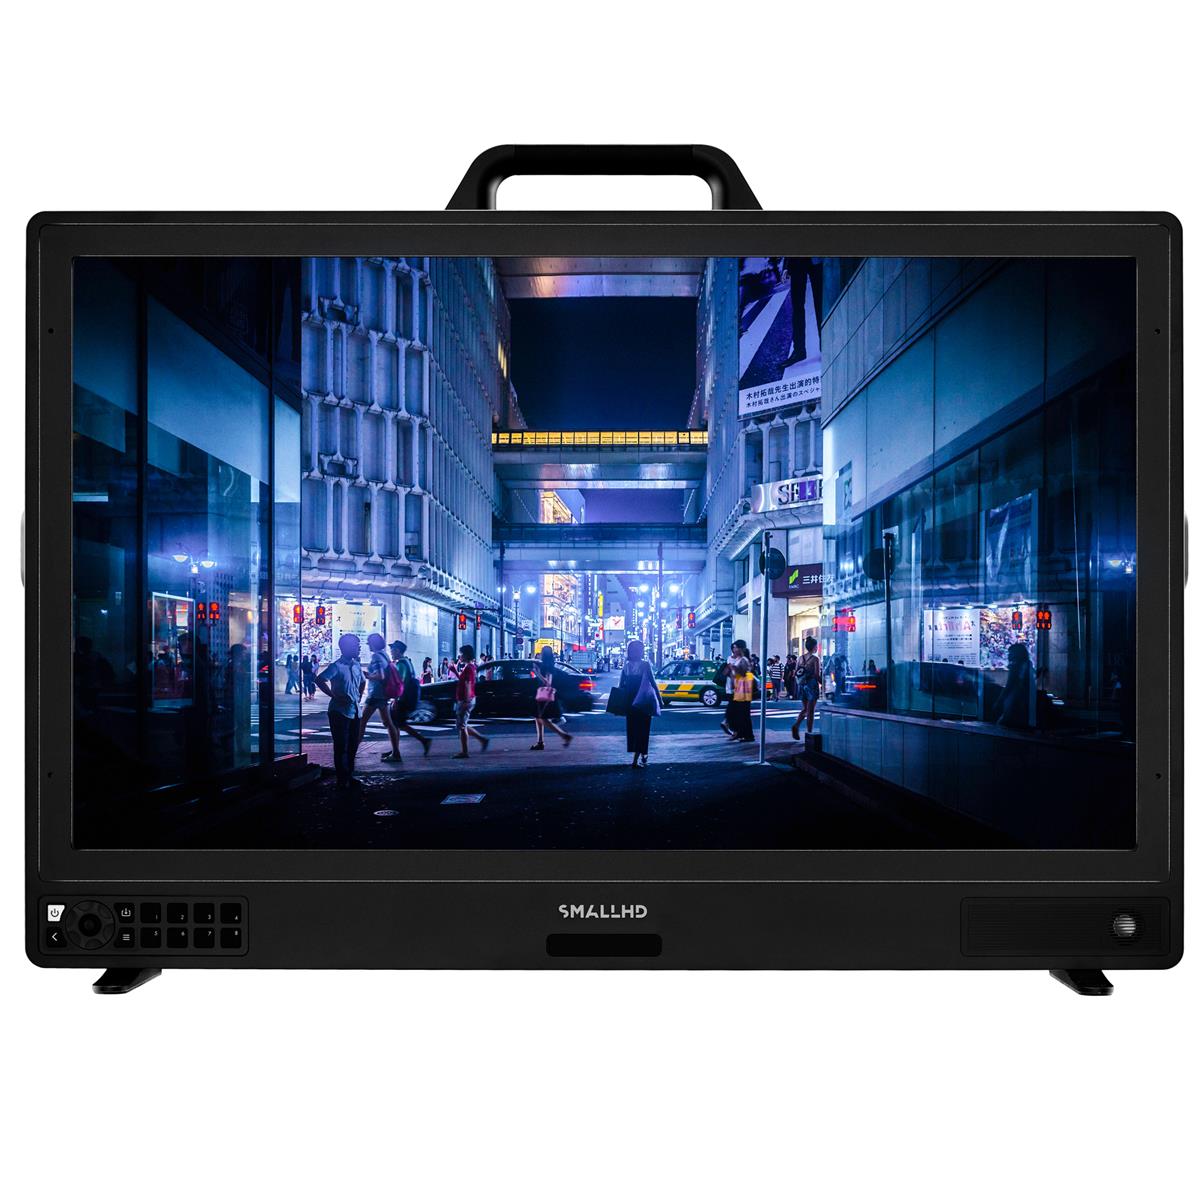 

SmallHD OLED 27" 4K Ultra HD LED Reference Monitor